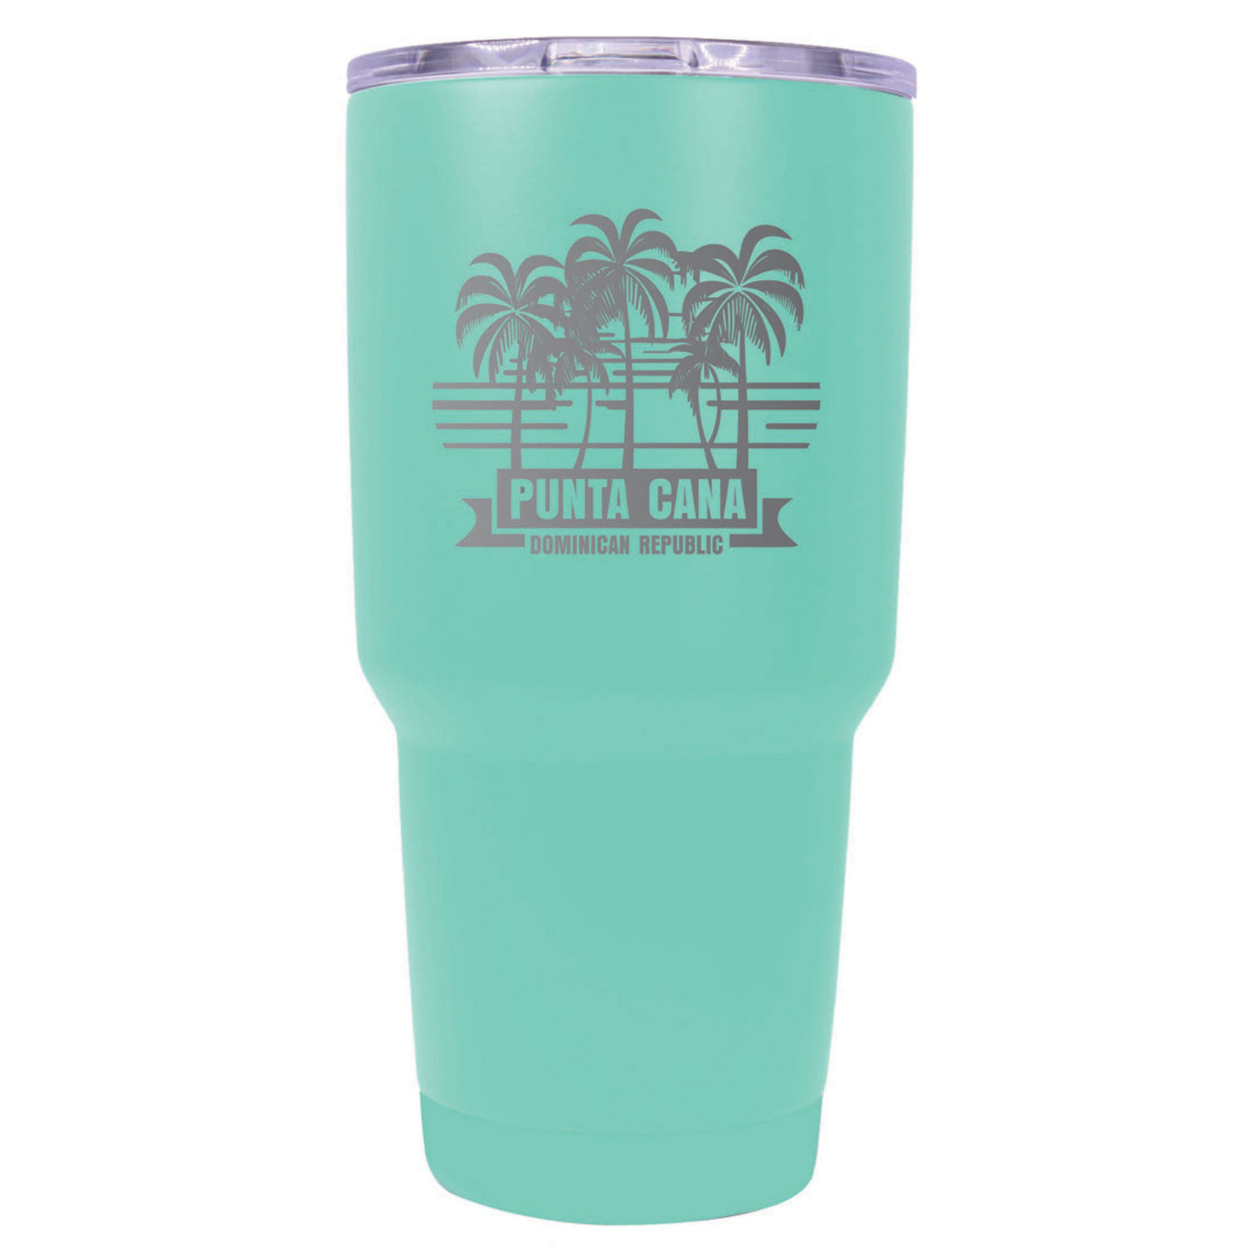 Punta Cana Dominican Republic Souvenir 24 Oz Insulated Stainless Steel Tumbler Etched - Stainless Steel, PALM BEACH